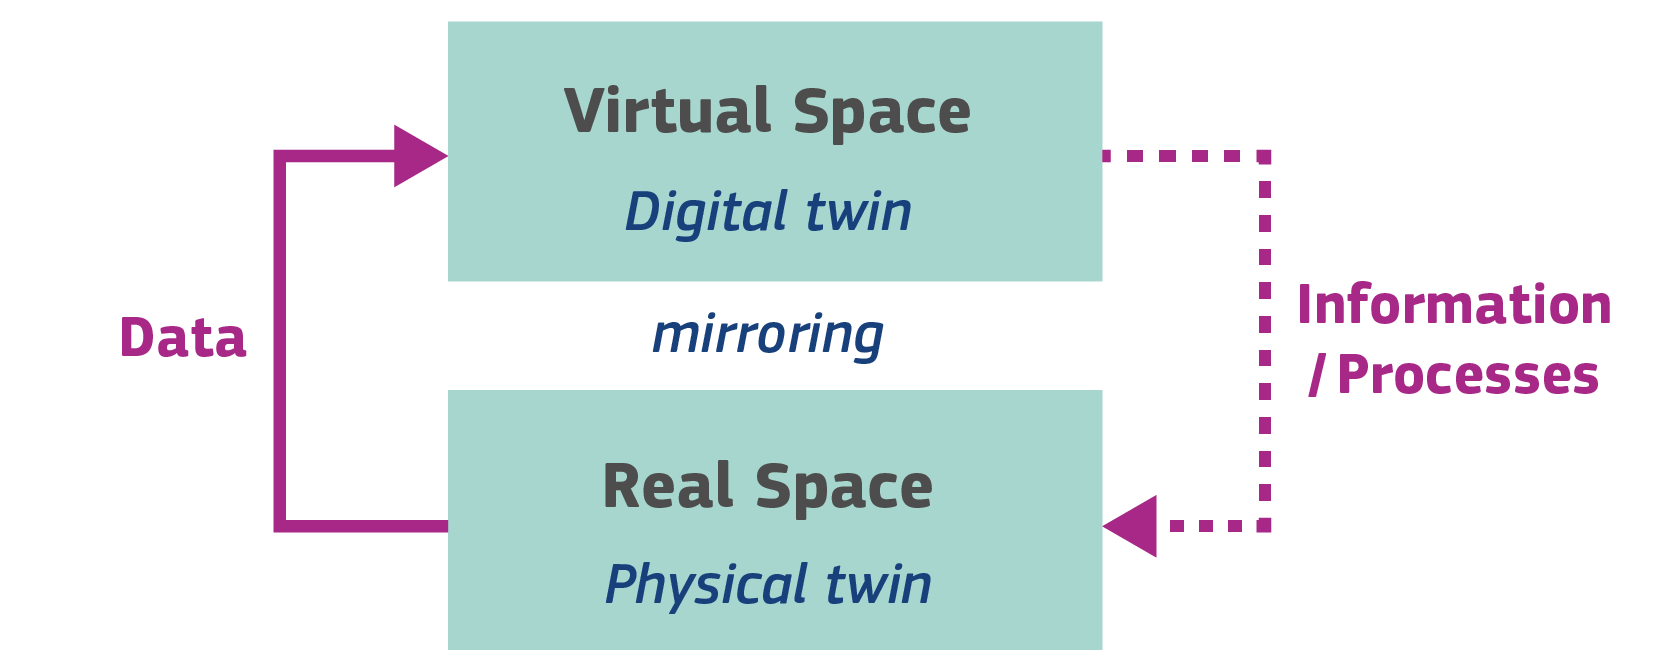 Infographic showing virtual space mirroring real space through data